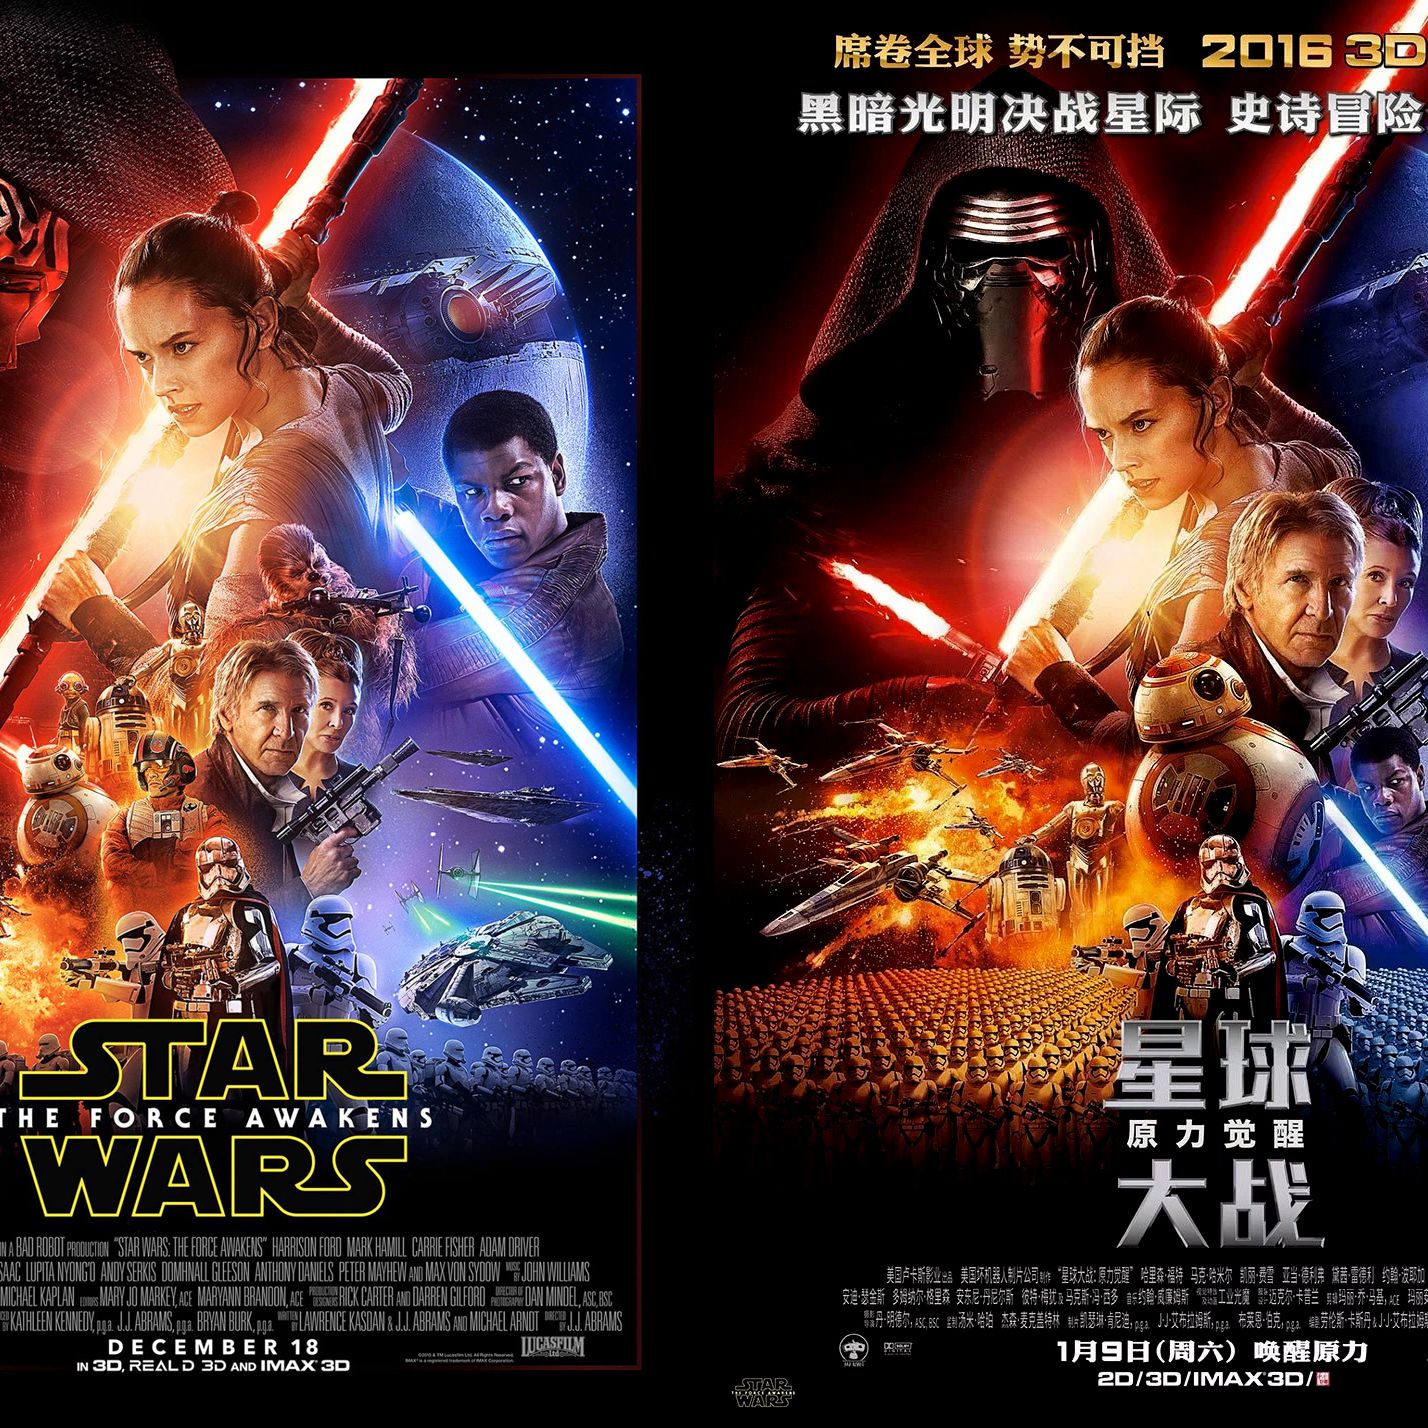 Star Wars: The Force Awakens' poster 'racist' |